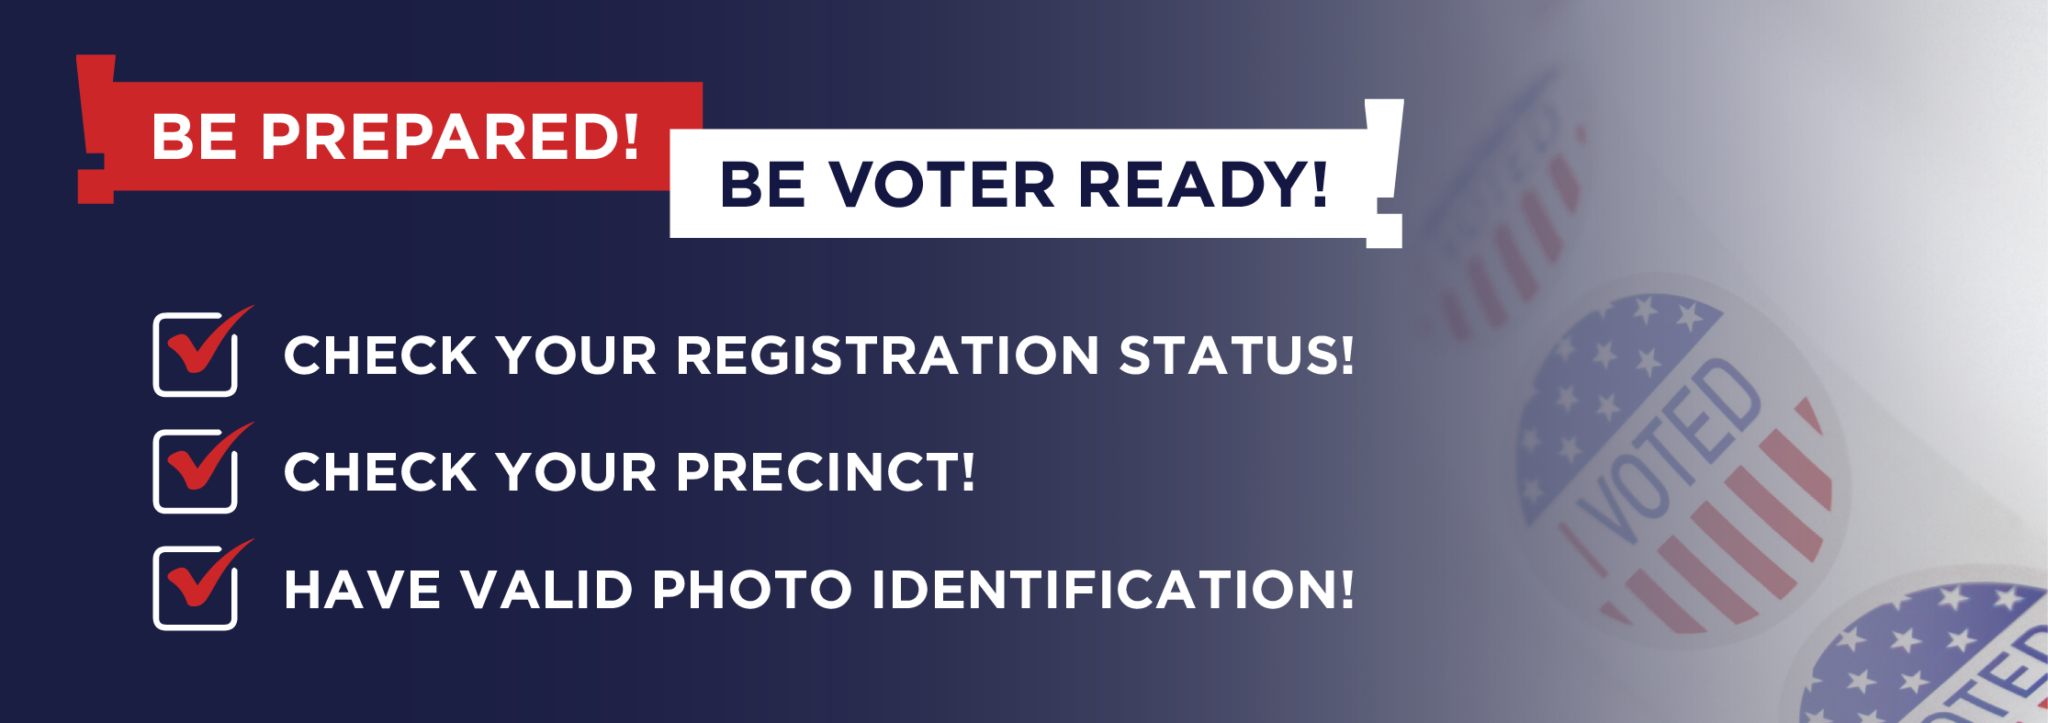 Be Prepared! Be Voter Ready!